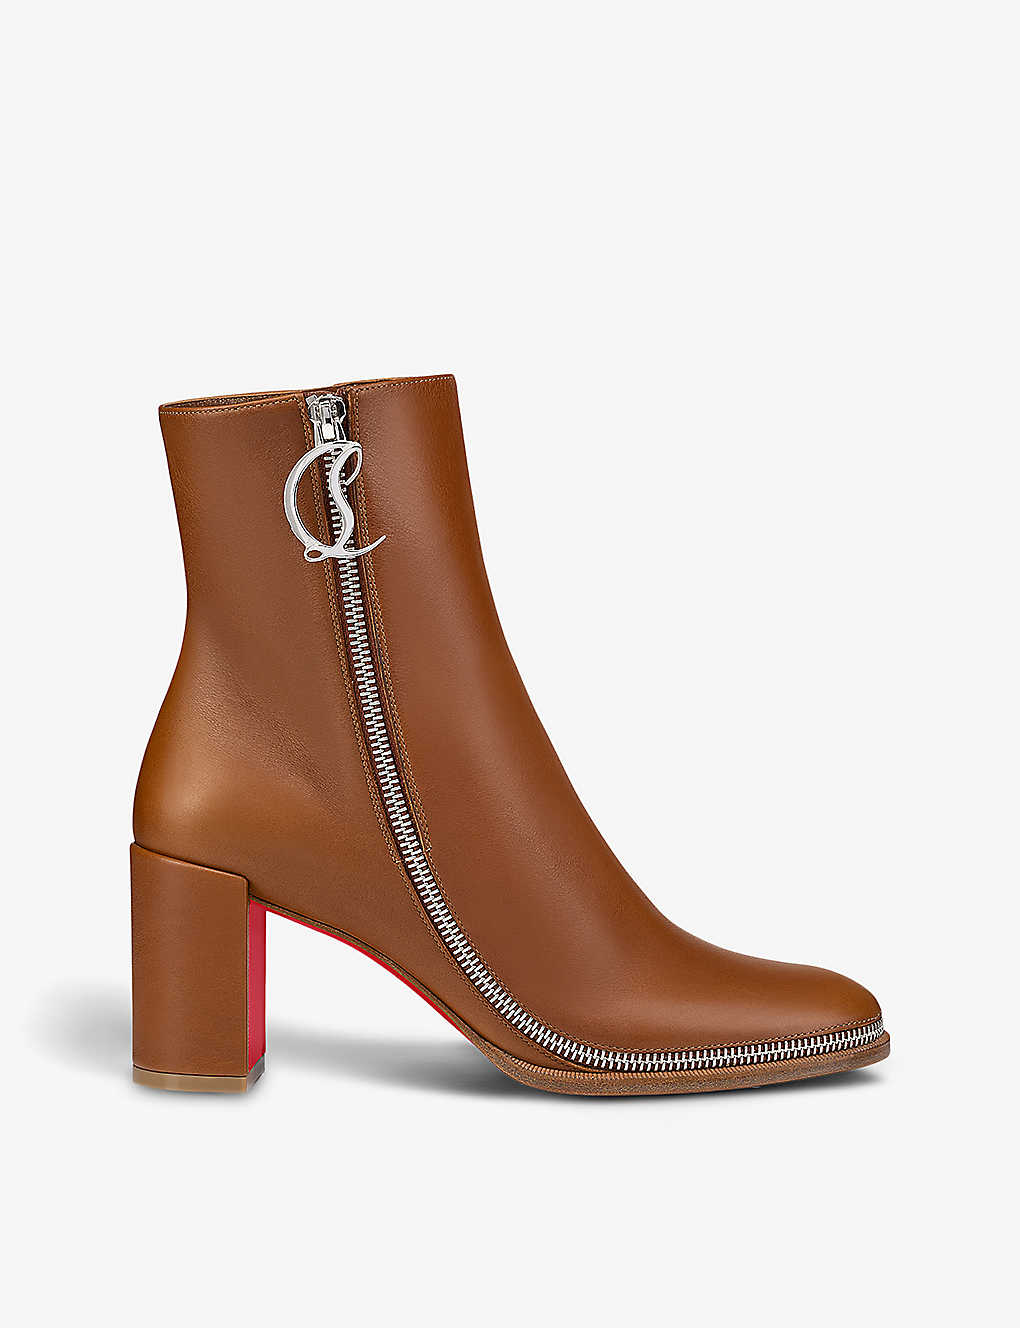 Shop Christian Louboutin Women's Cuoio Cl Zip Booty 70 Logo-plaque Leather Heeled Ankle Boots